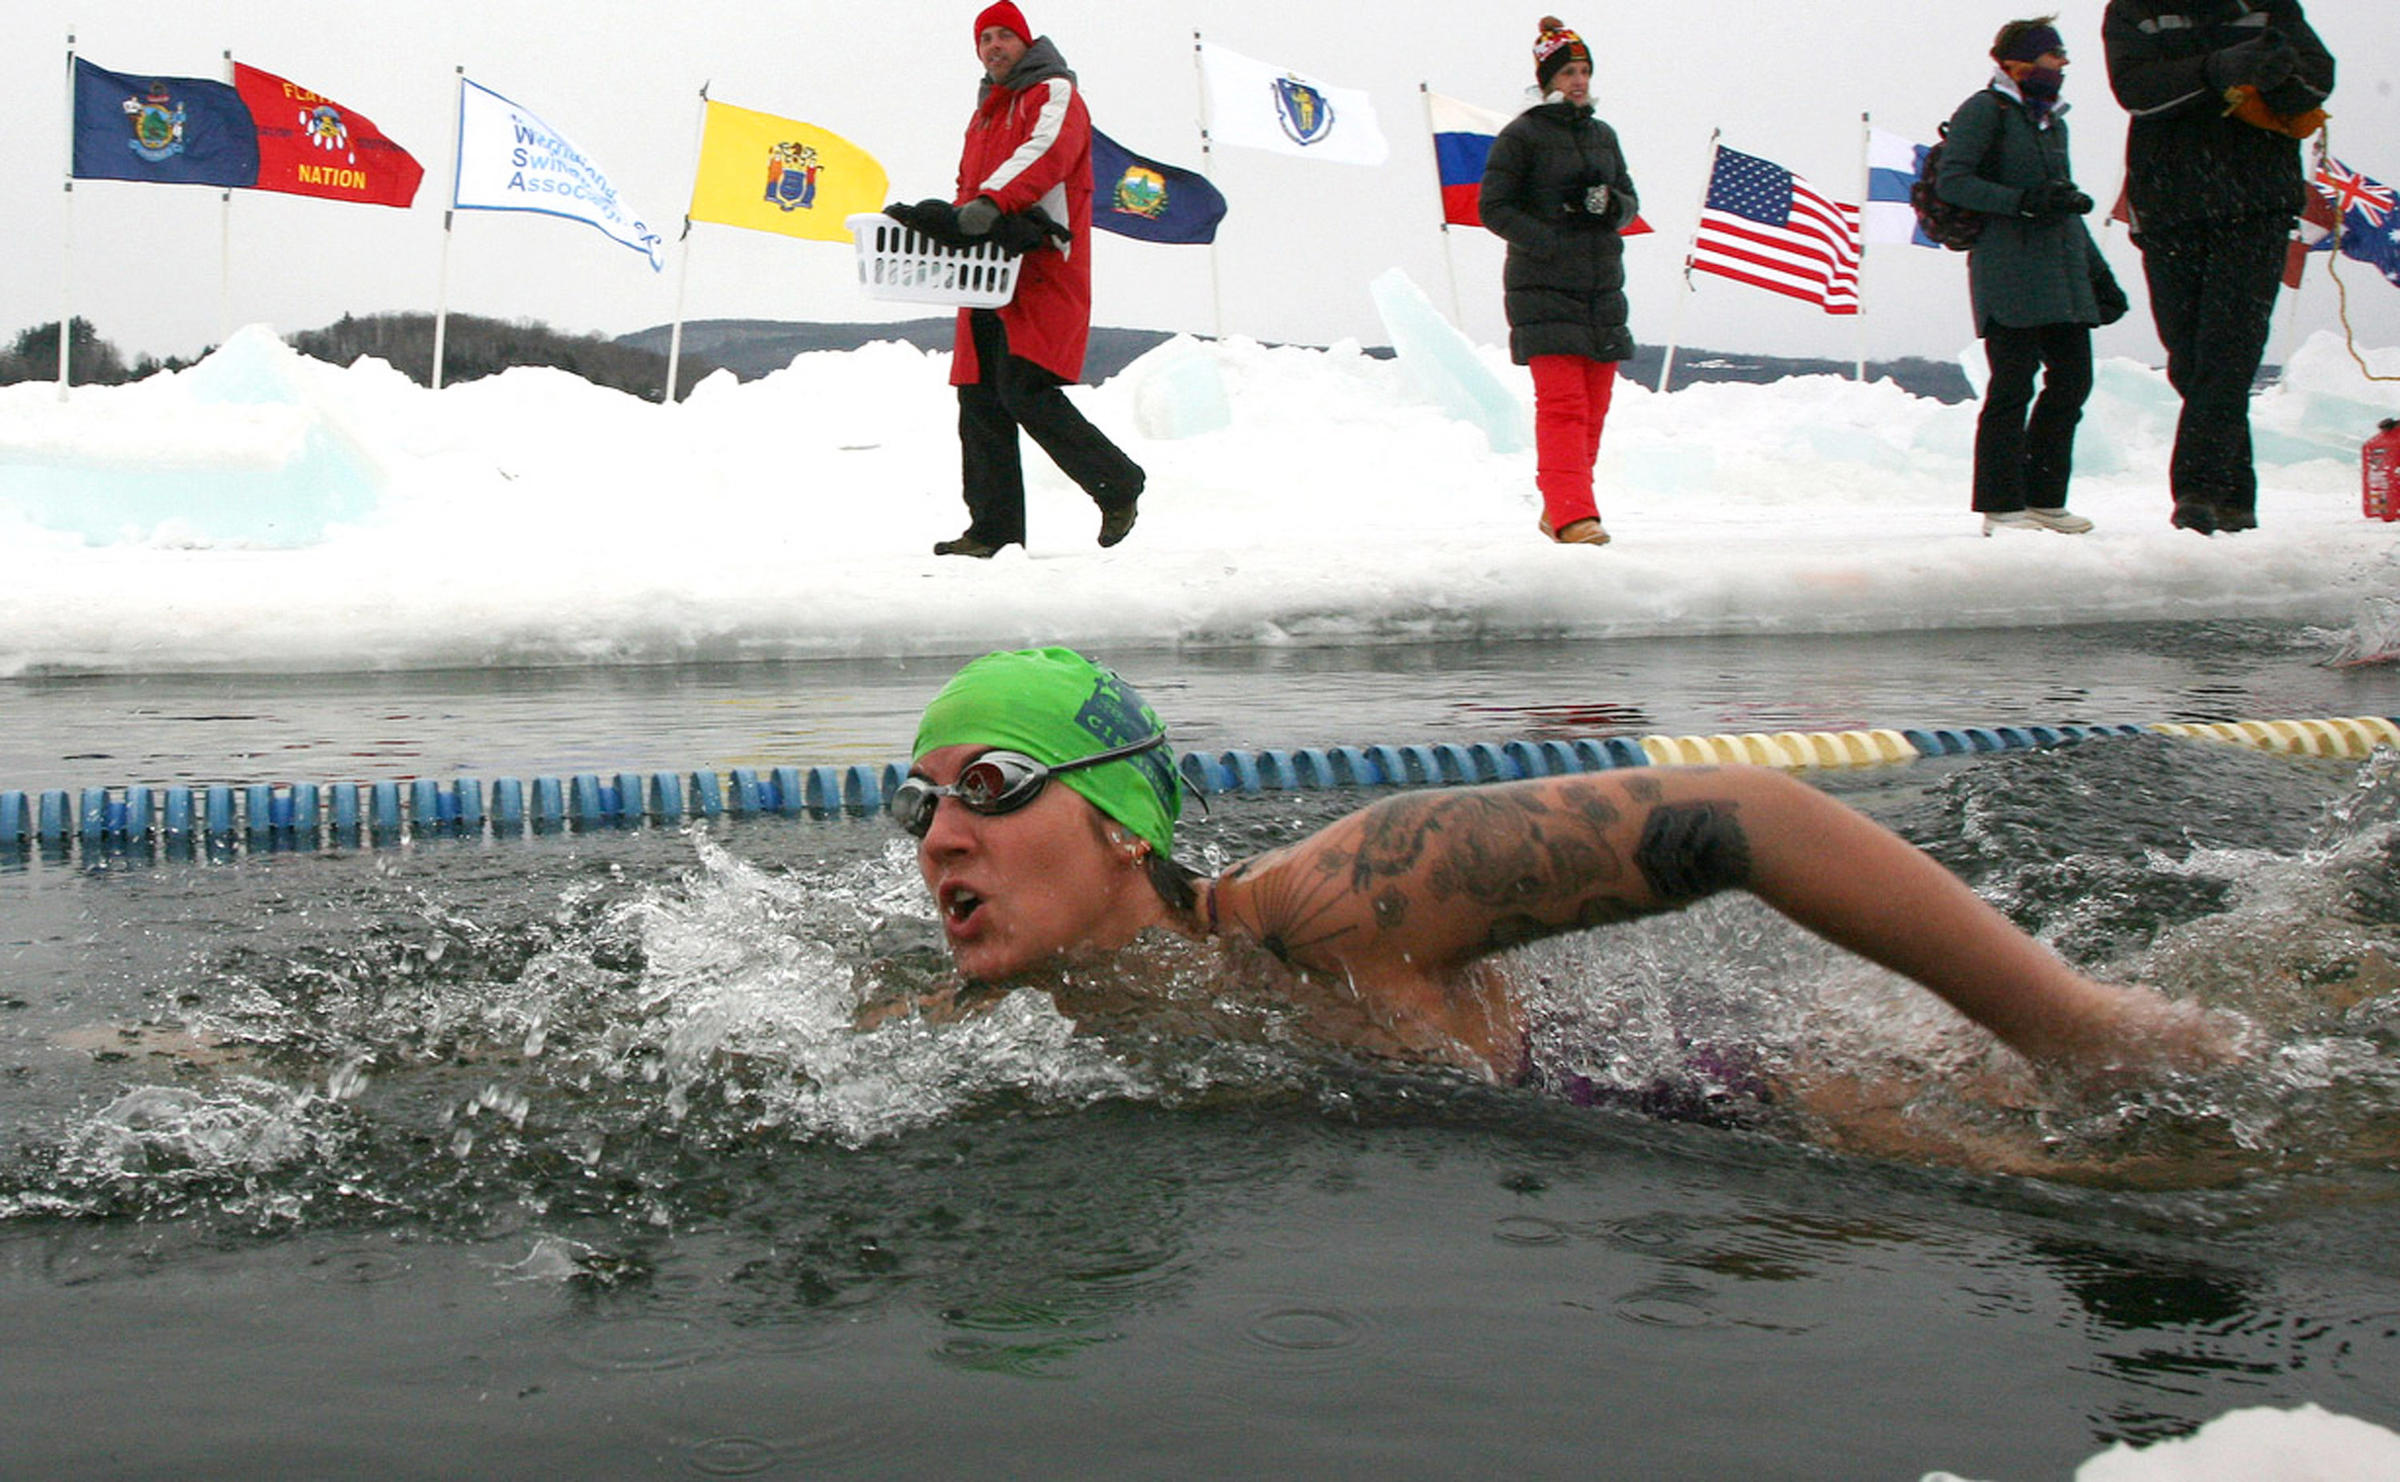 'Cold Actually Feels Good' At The U.S. Winter Swimming Championship